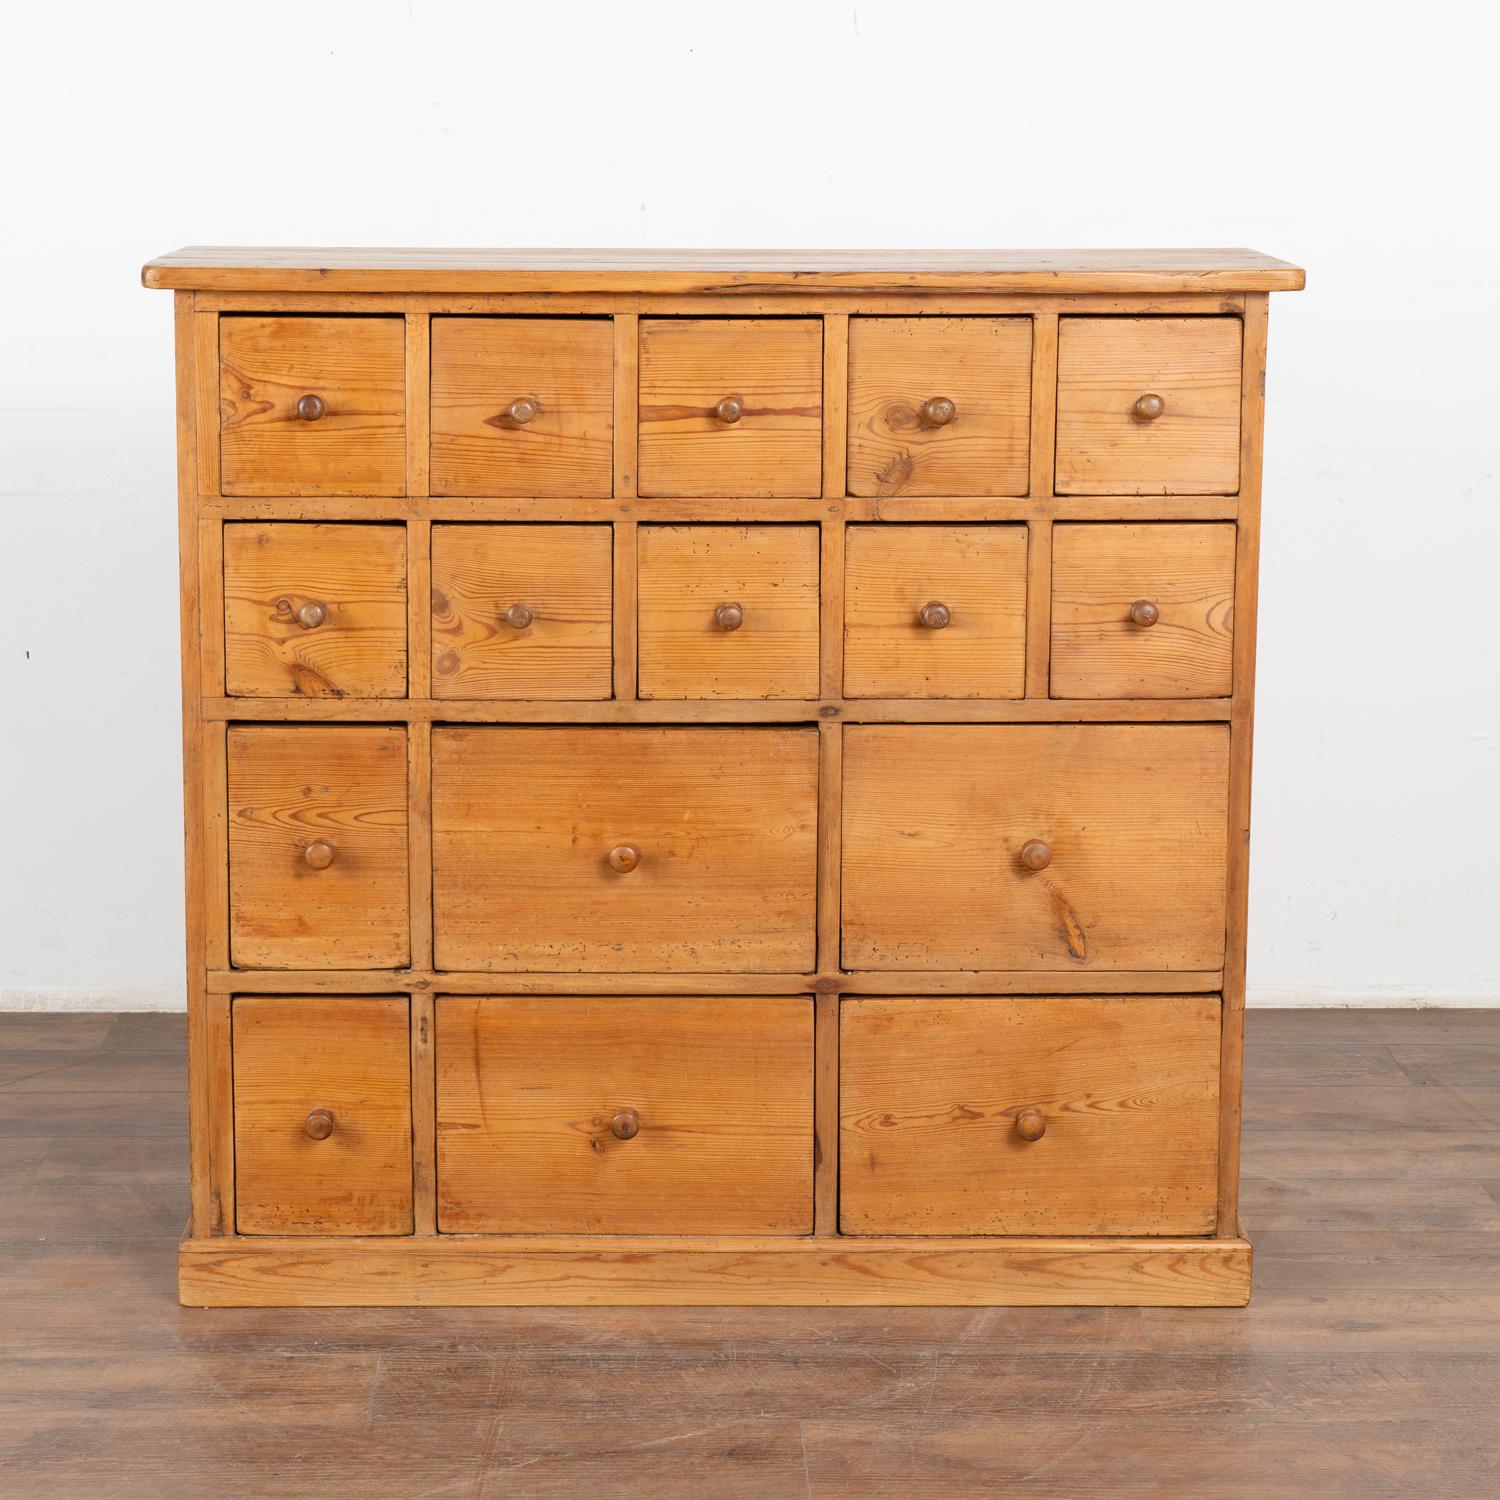 Danish Pine Apothecary Console Chest of 16 Drawers, Denmark circa 1880 For Sale